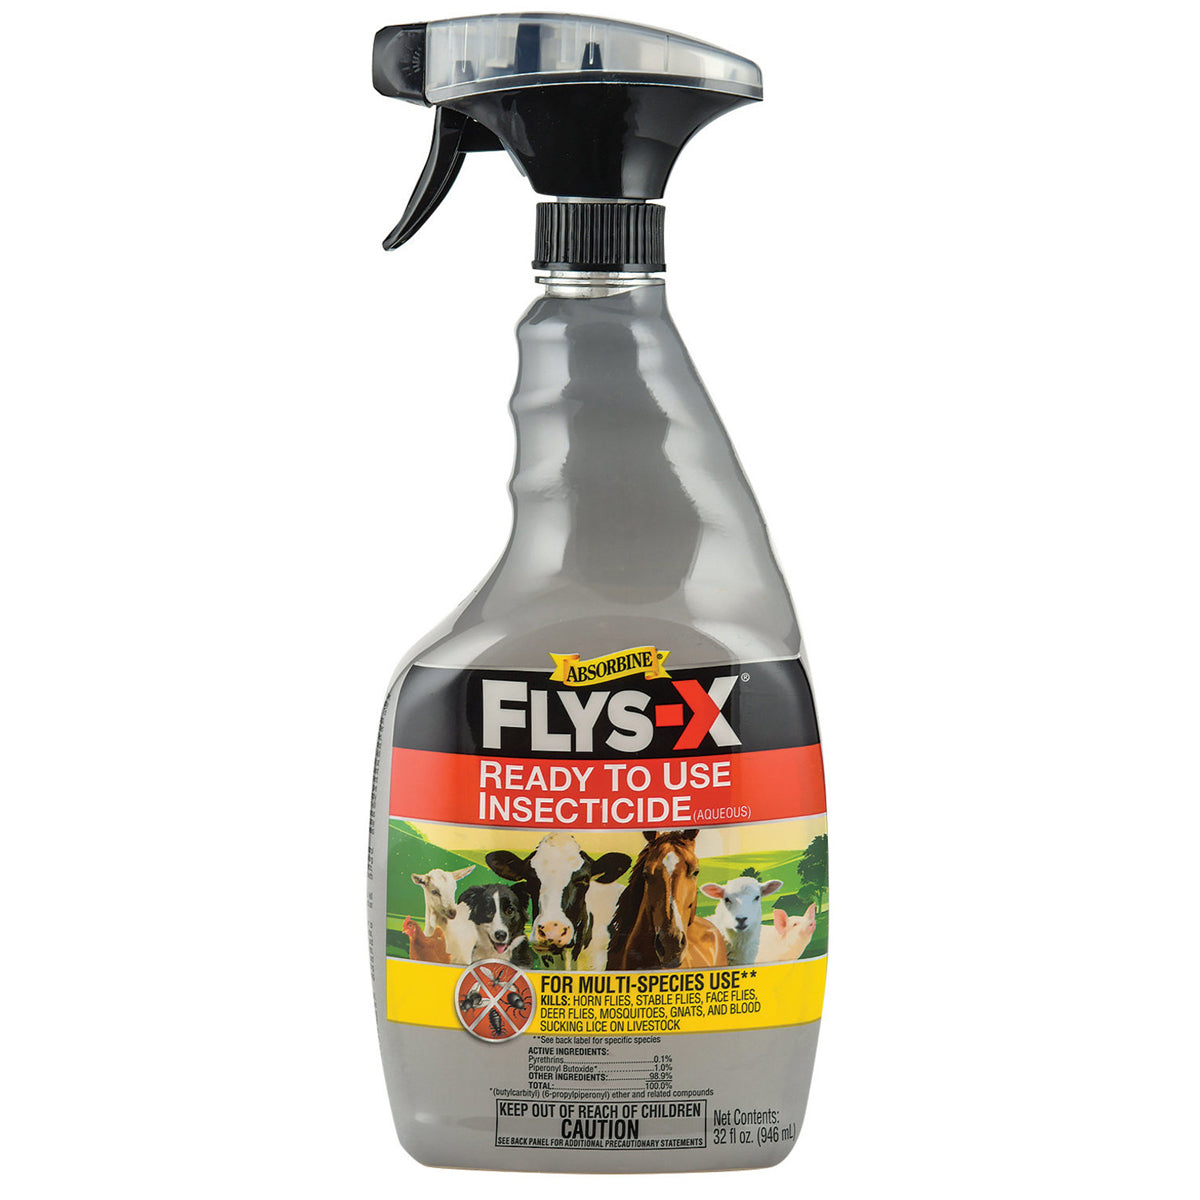 Absorbine Flys X Insecticide Spray